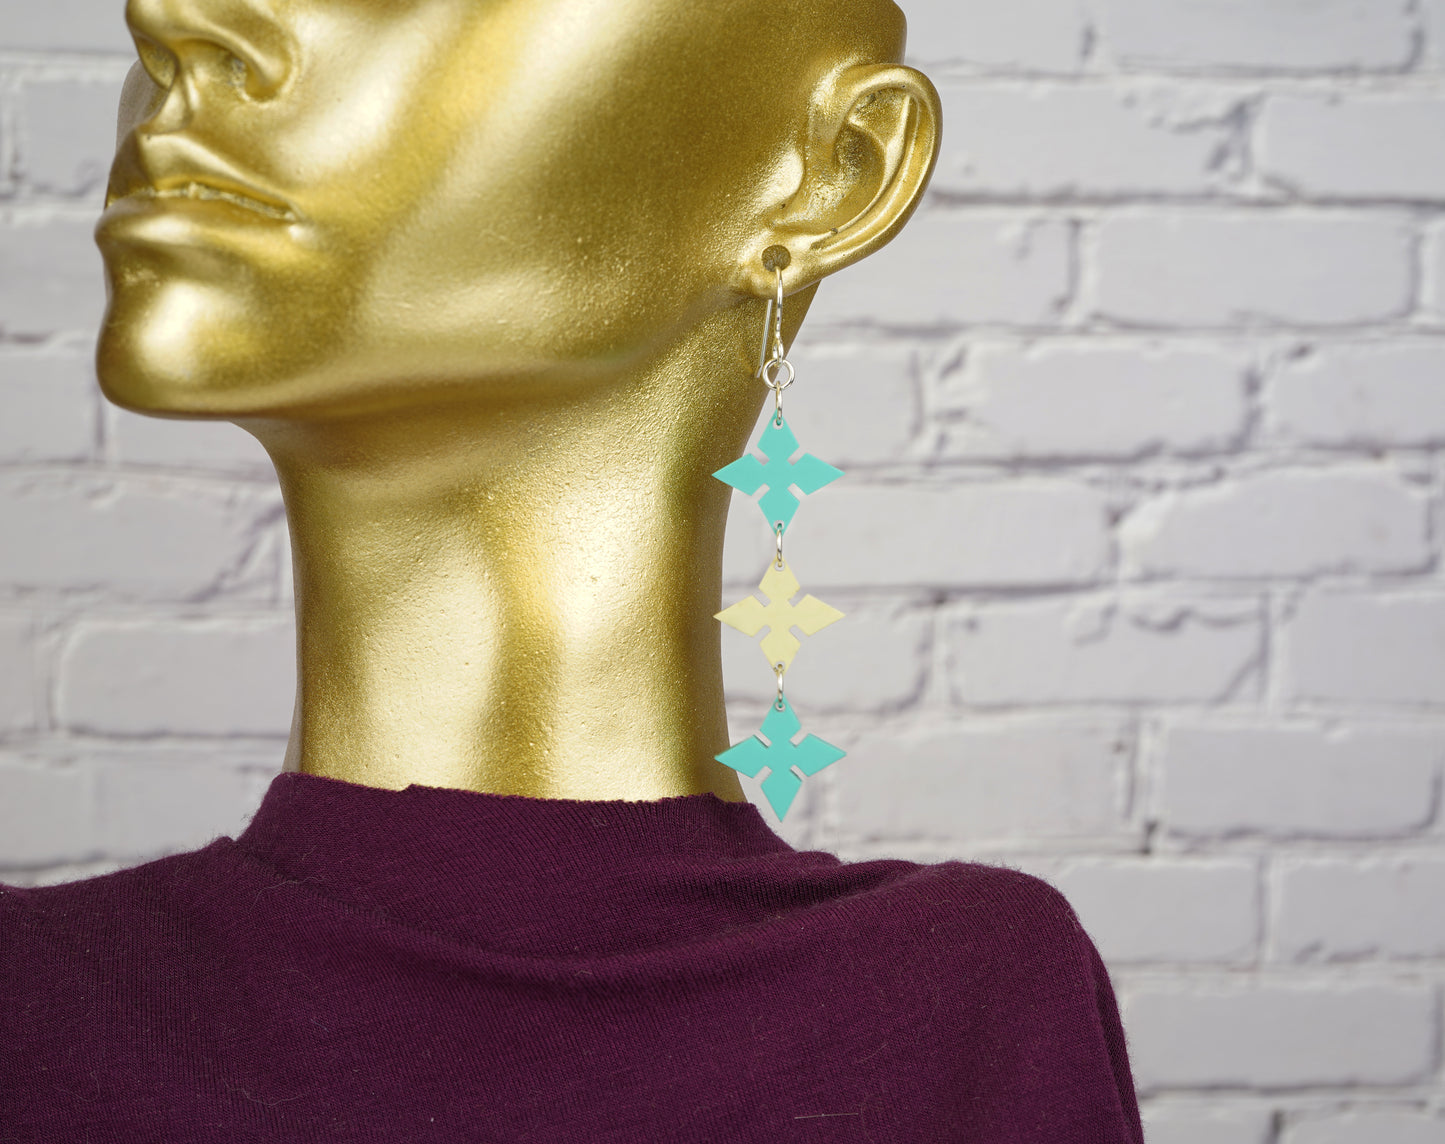 Pointed Diamond Dangle Earrings- Teal and Pale Yellow